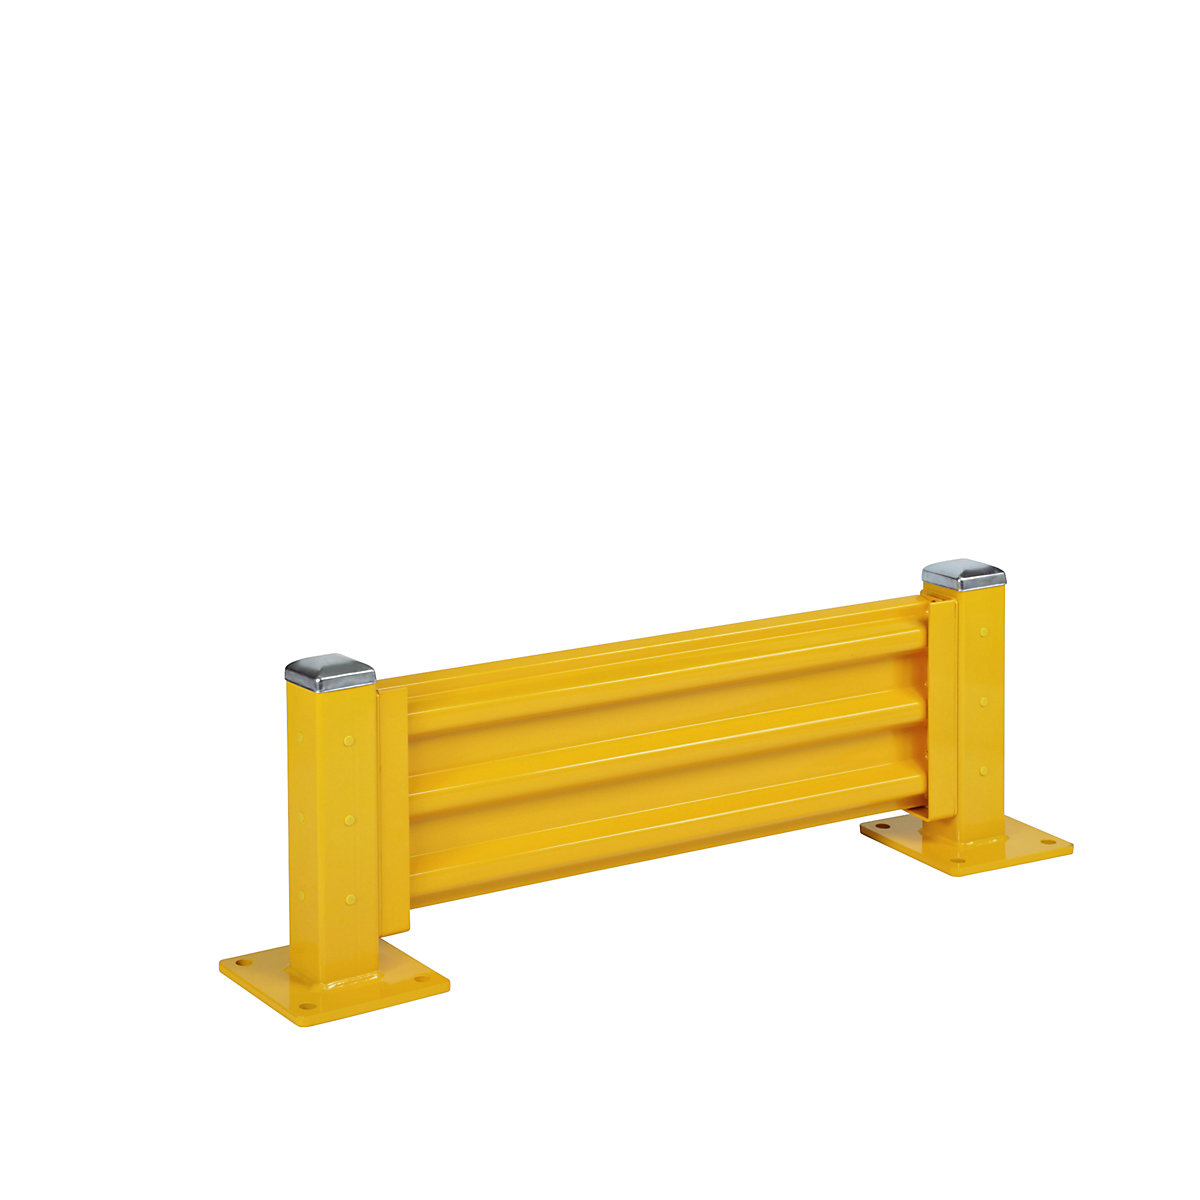 Crash protection wall, height 480 mm, 1 wall section, length 1067 mm, standard section incl. 2 posts-4